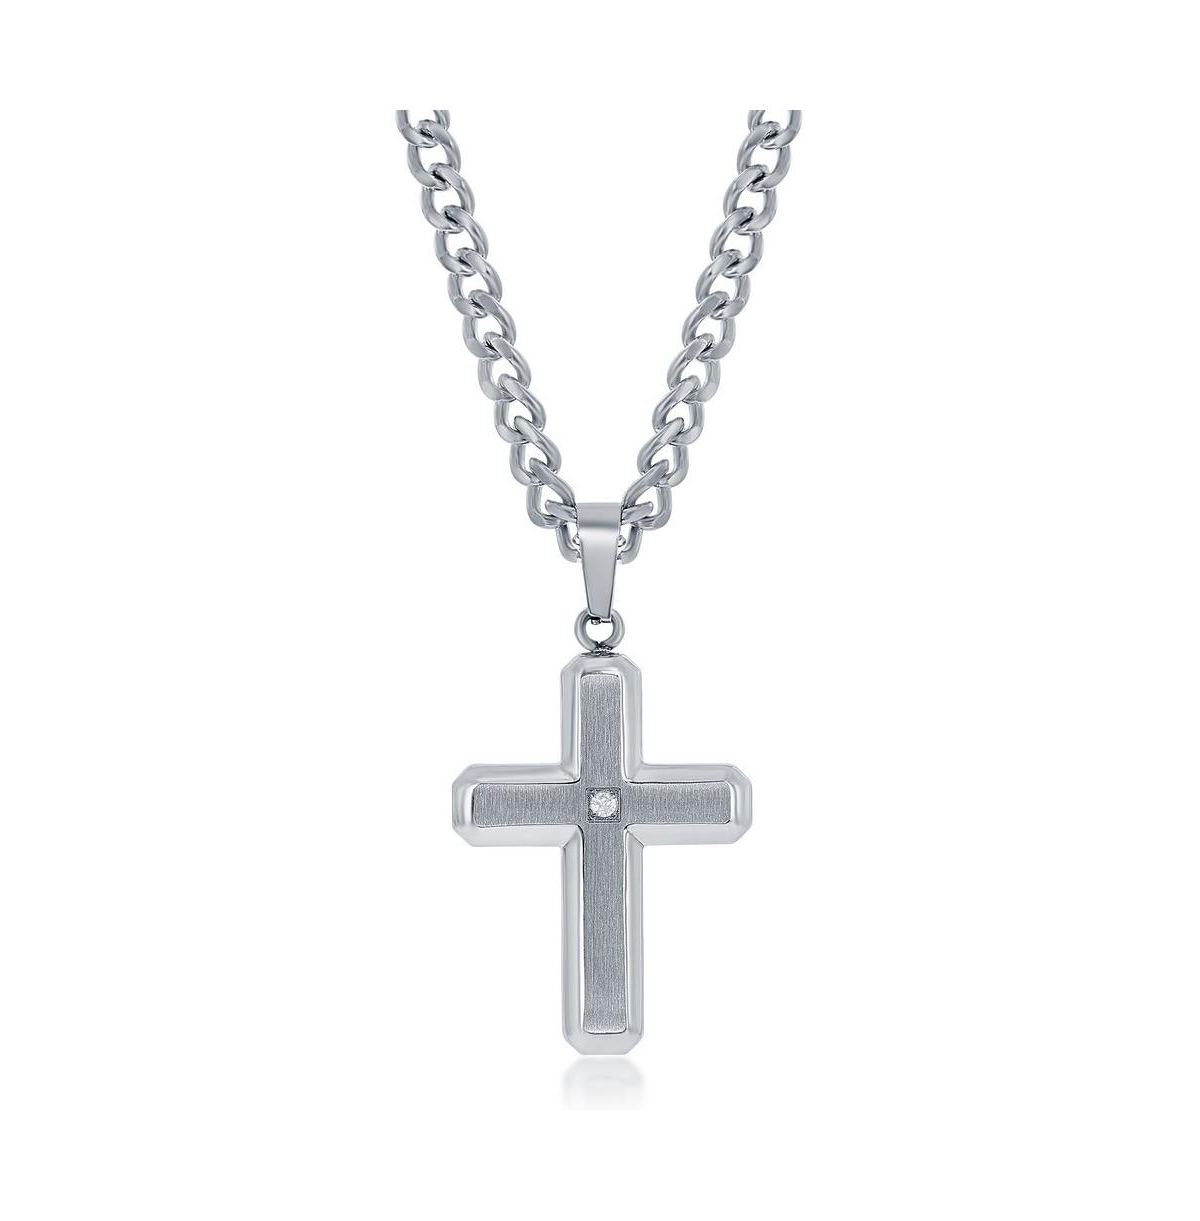 BLACKJACK MENS STAINESS STEEL BRUSHED POLISHED W/ CZ CROSS NECKLACE